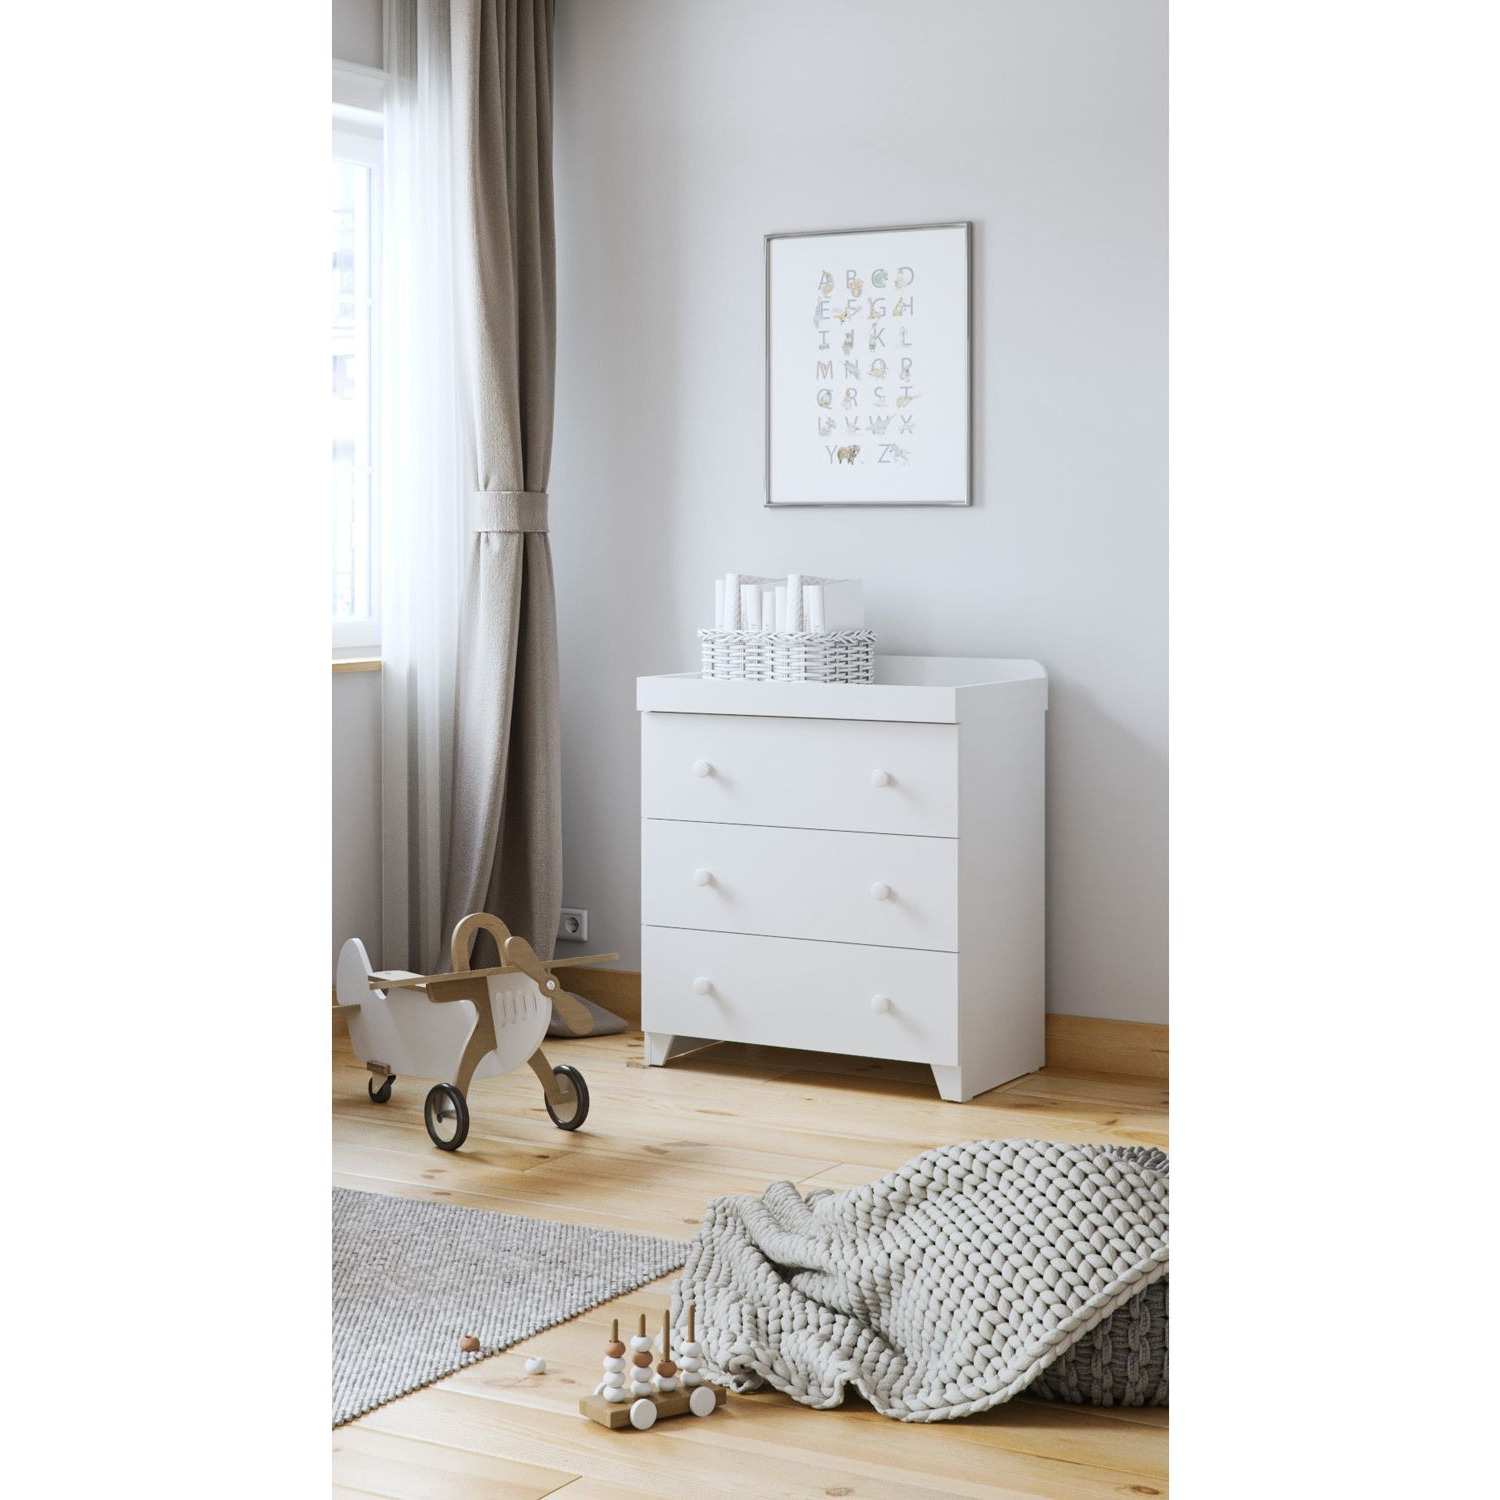 Little Acorns Classic Changing Table Dresser, White - image 1